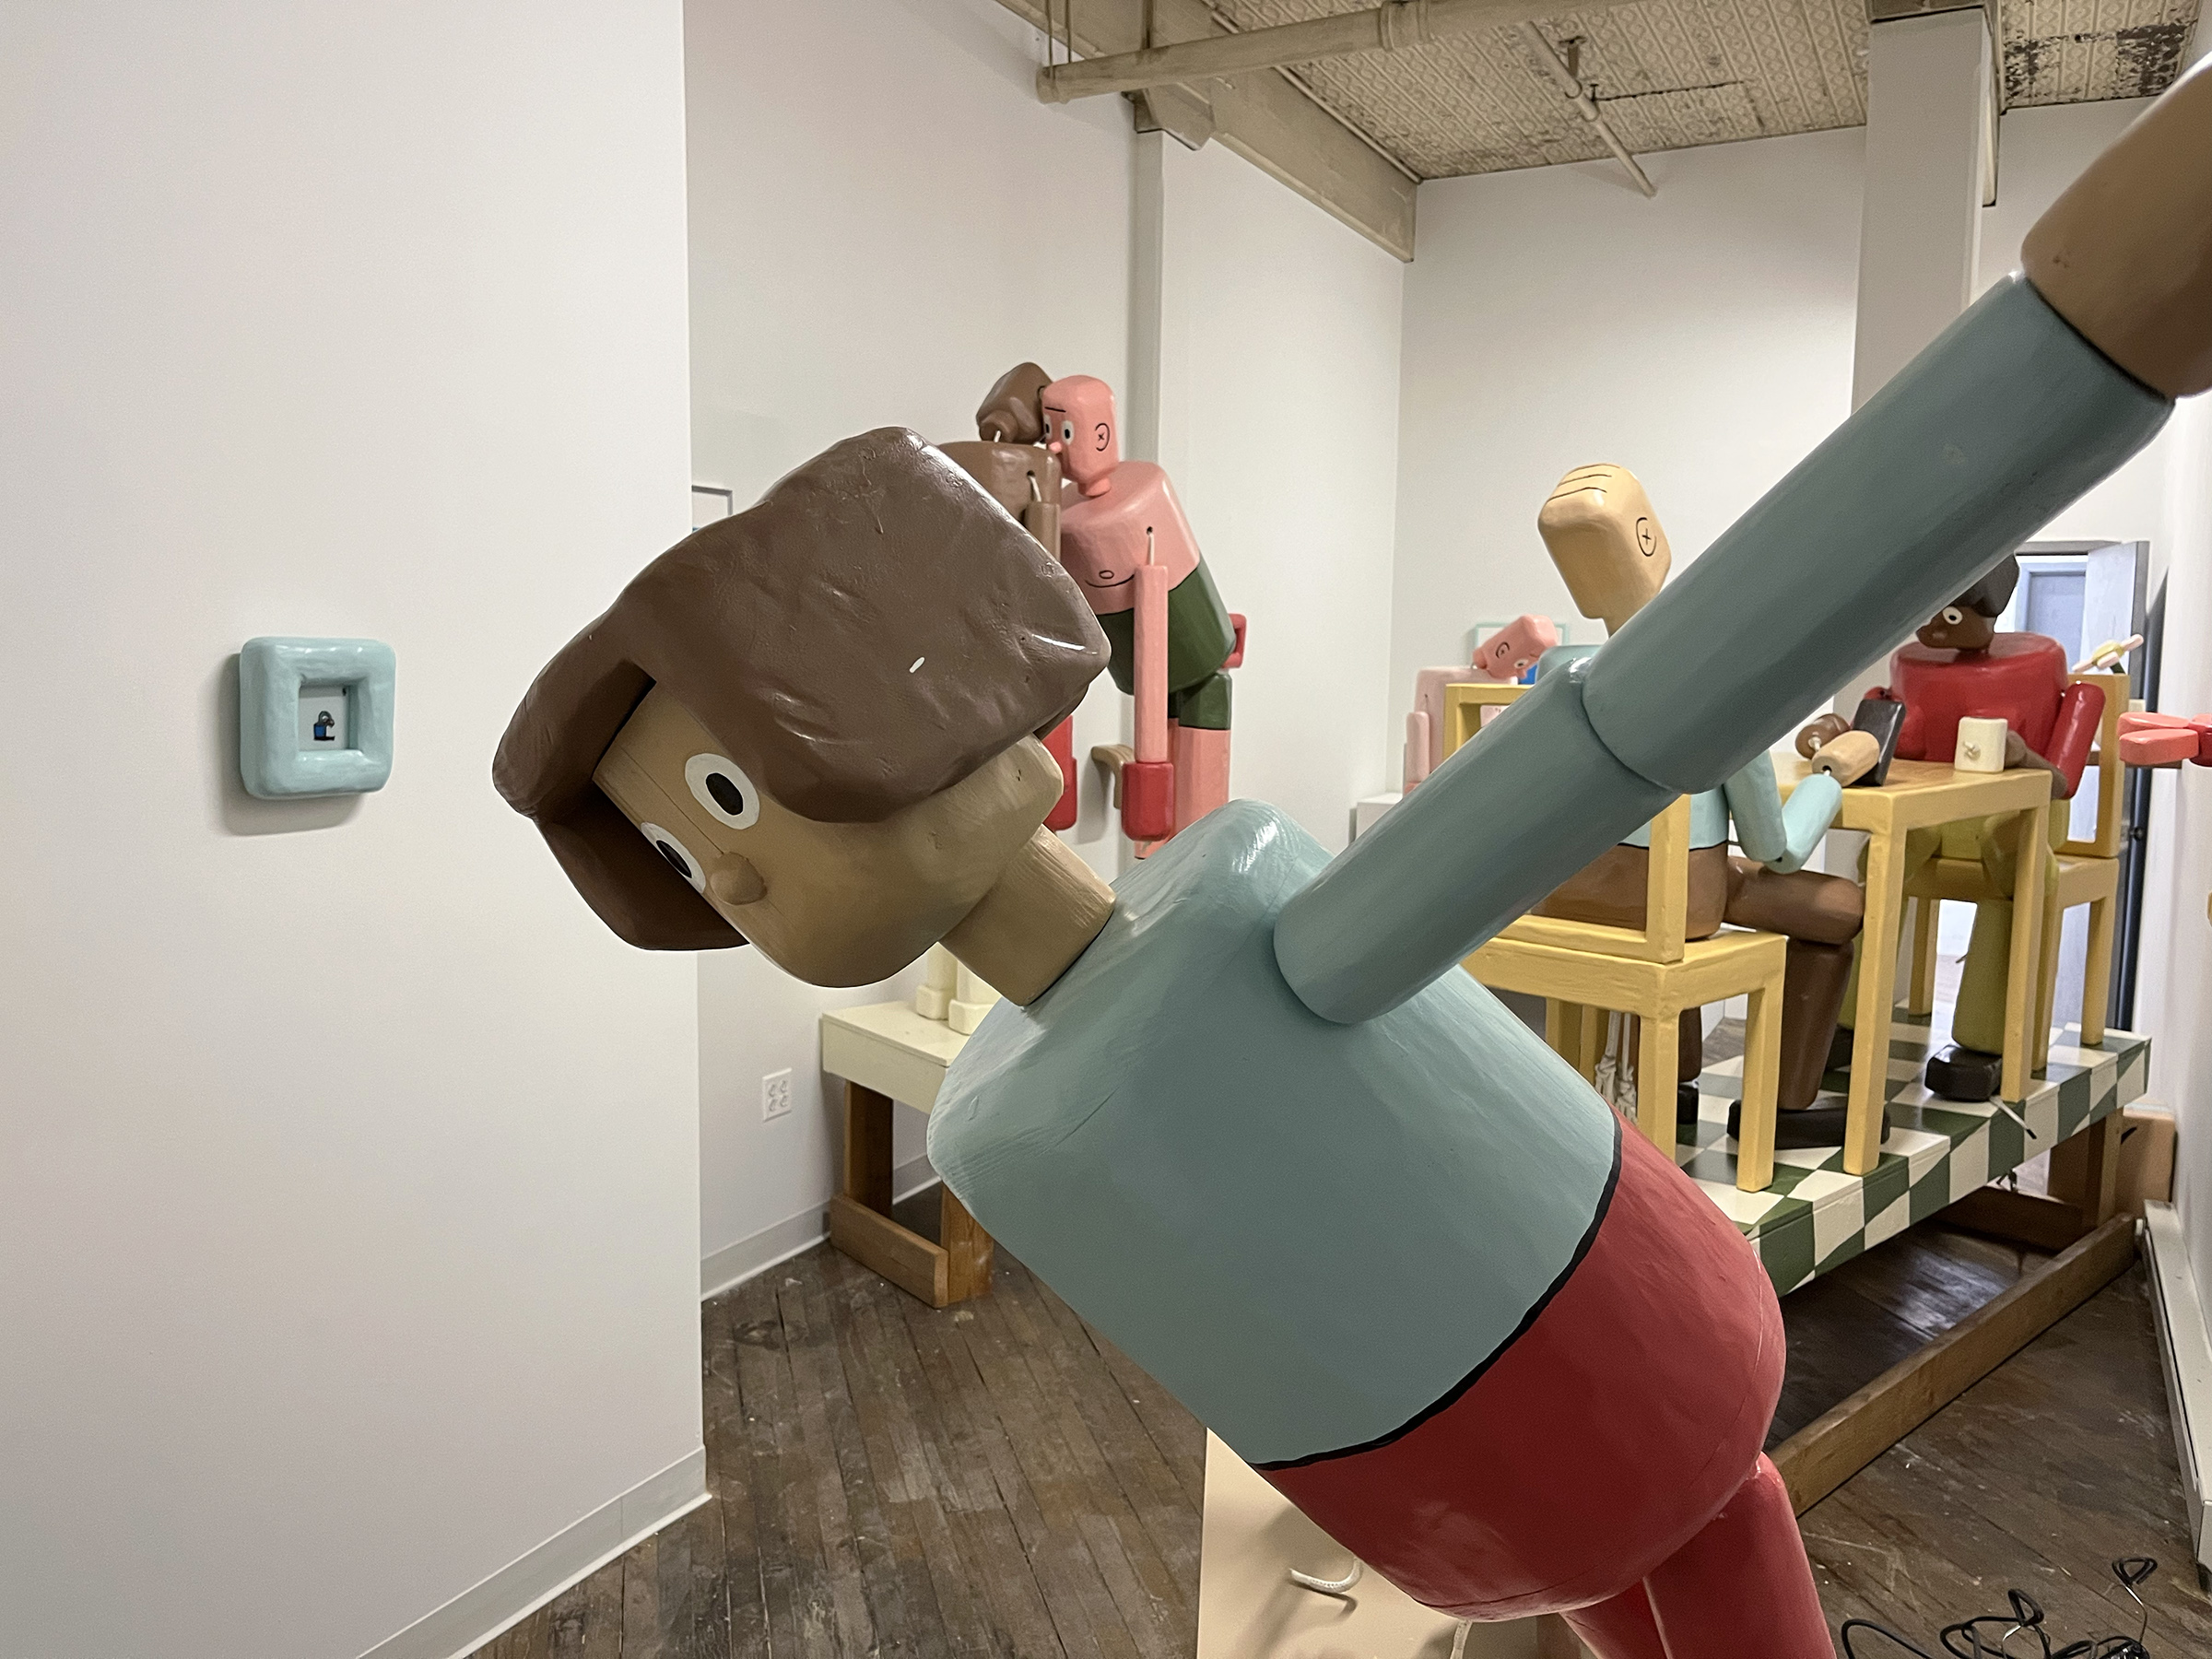 A photograph of an art installation featuring multiple figurative wooden sculptures. The life-sized sculptures resemble push puppet toys.